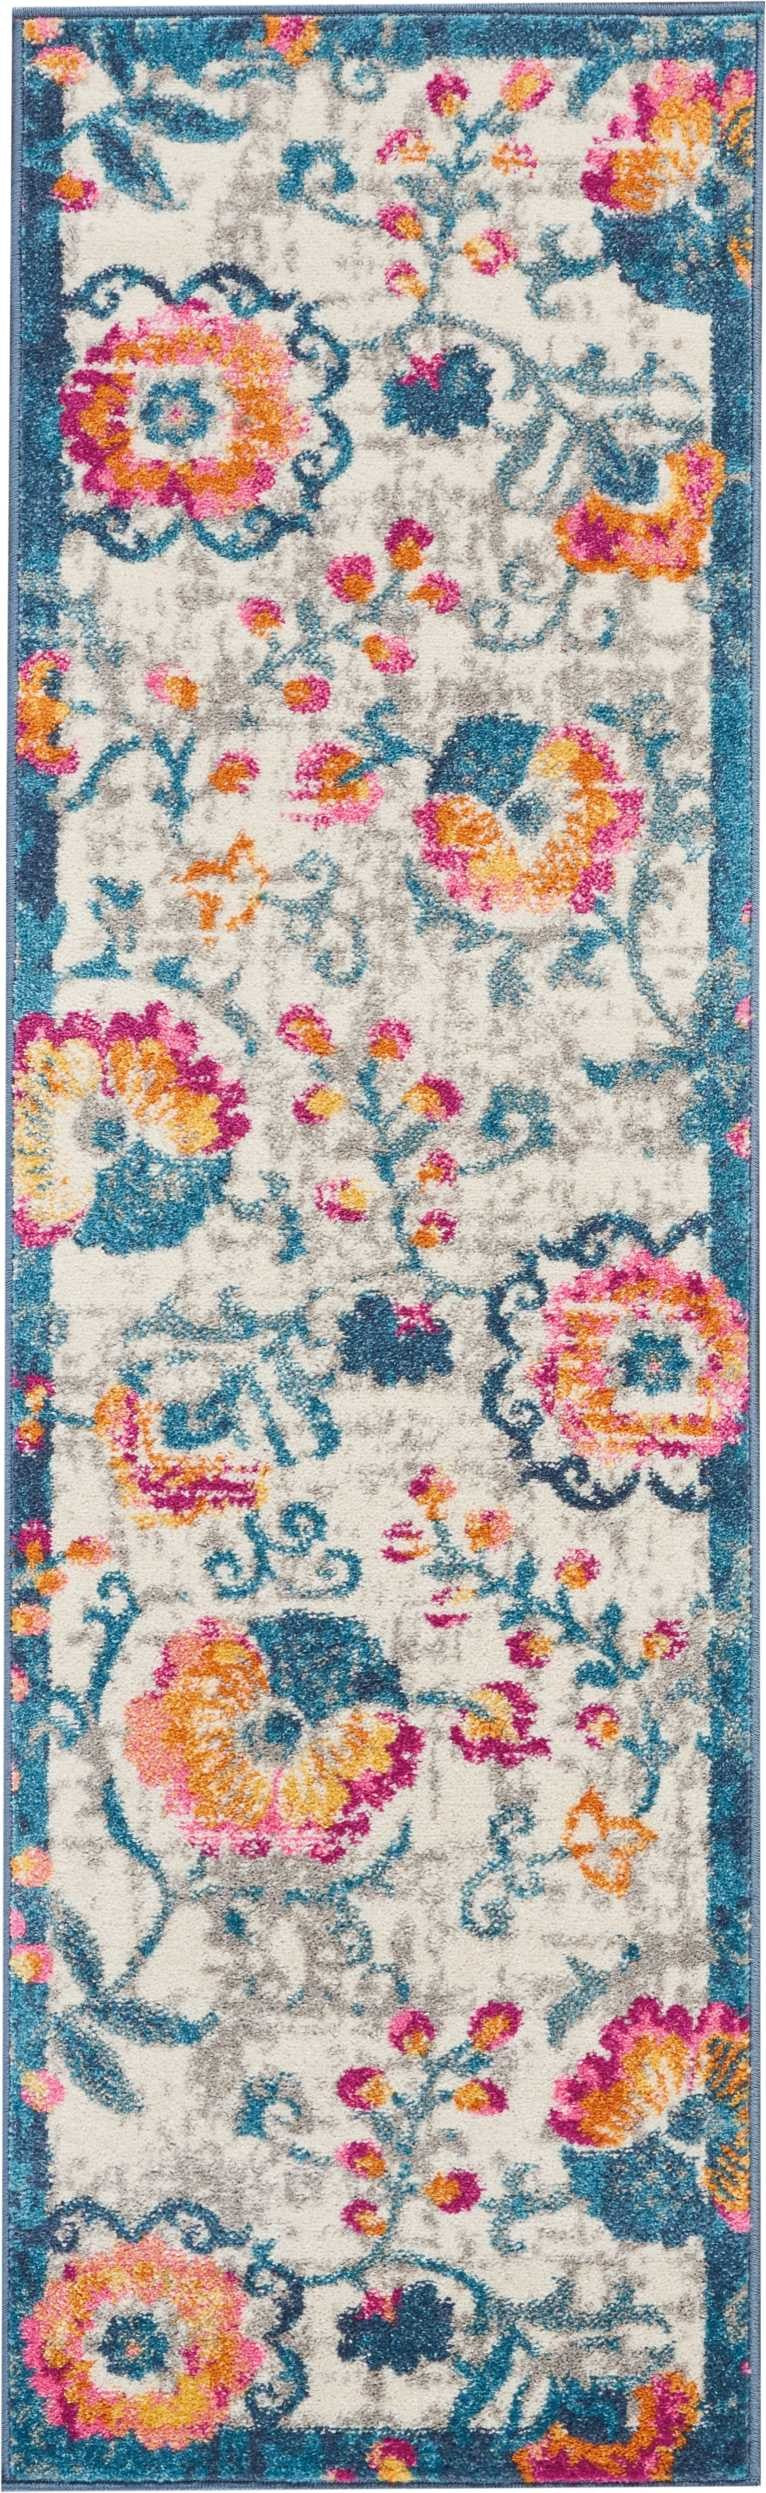 2’ X 6’ Ivory And Blue Floral Vines Runner Rug - 99fab 